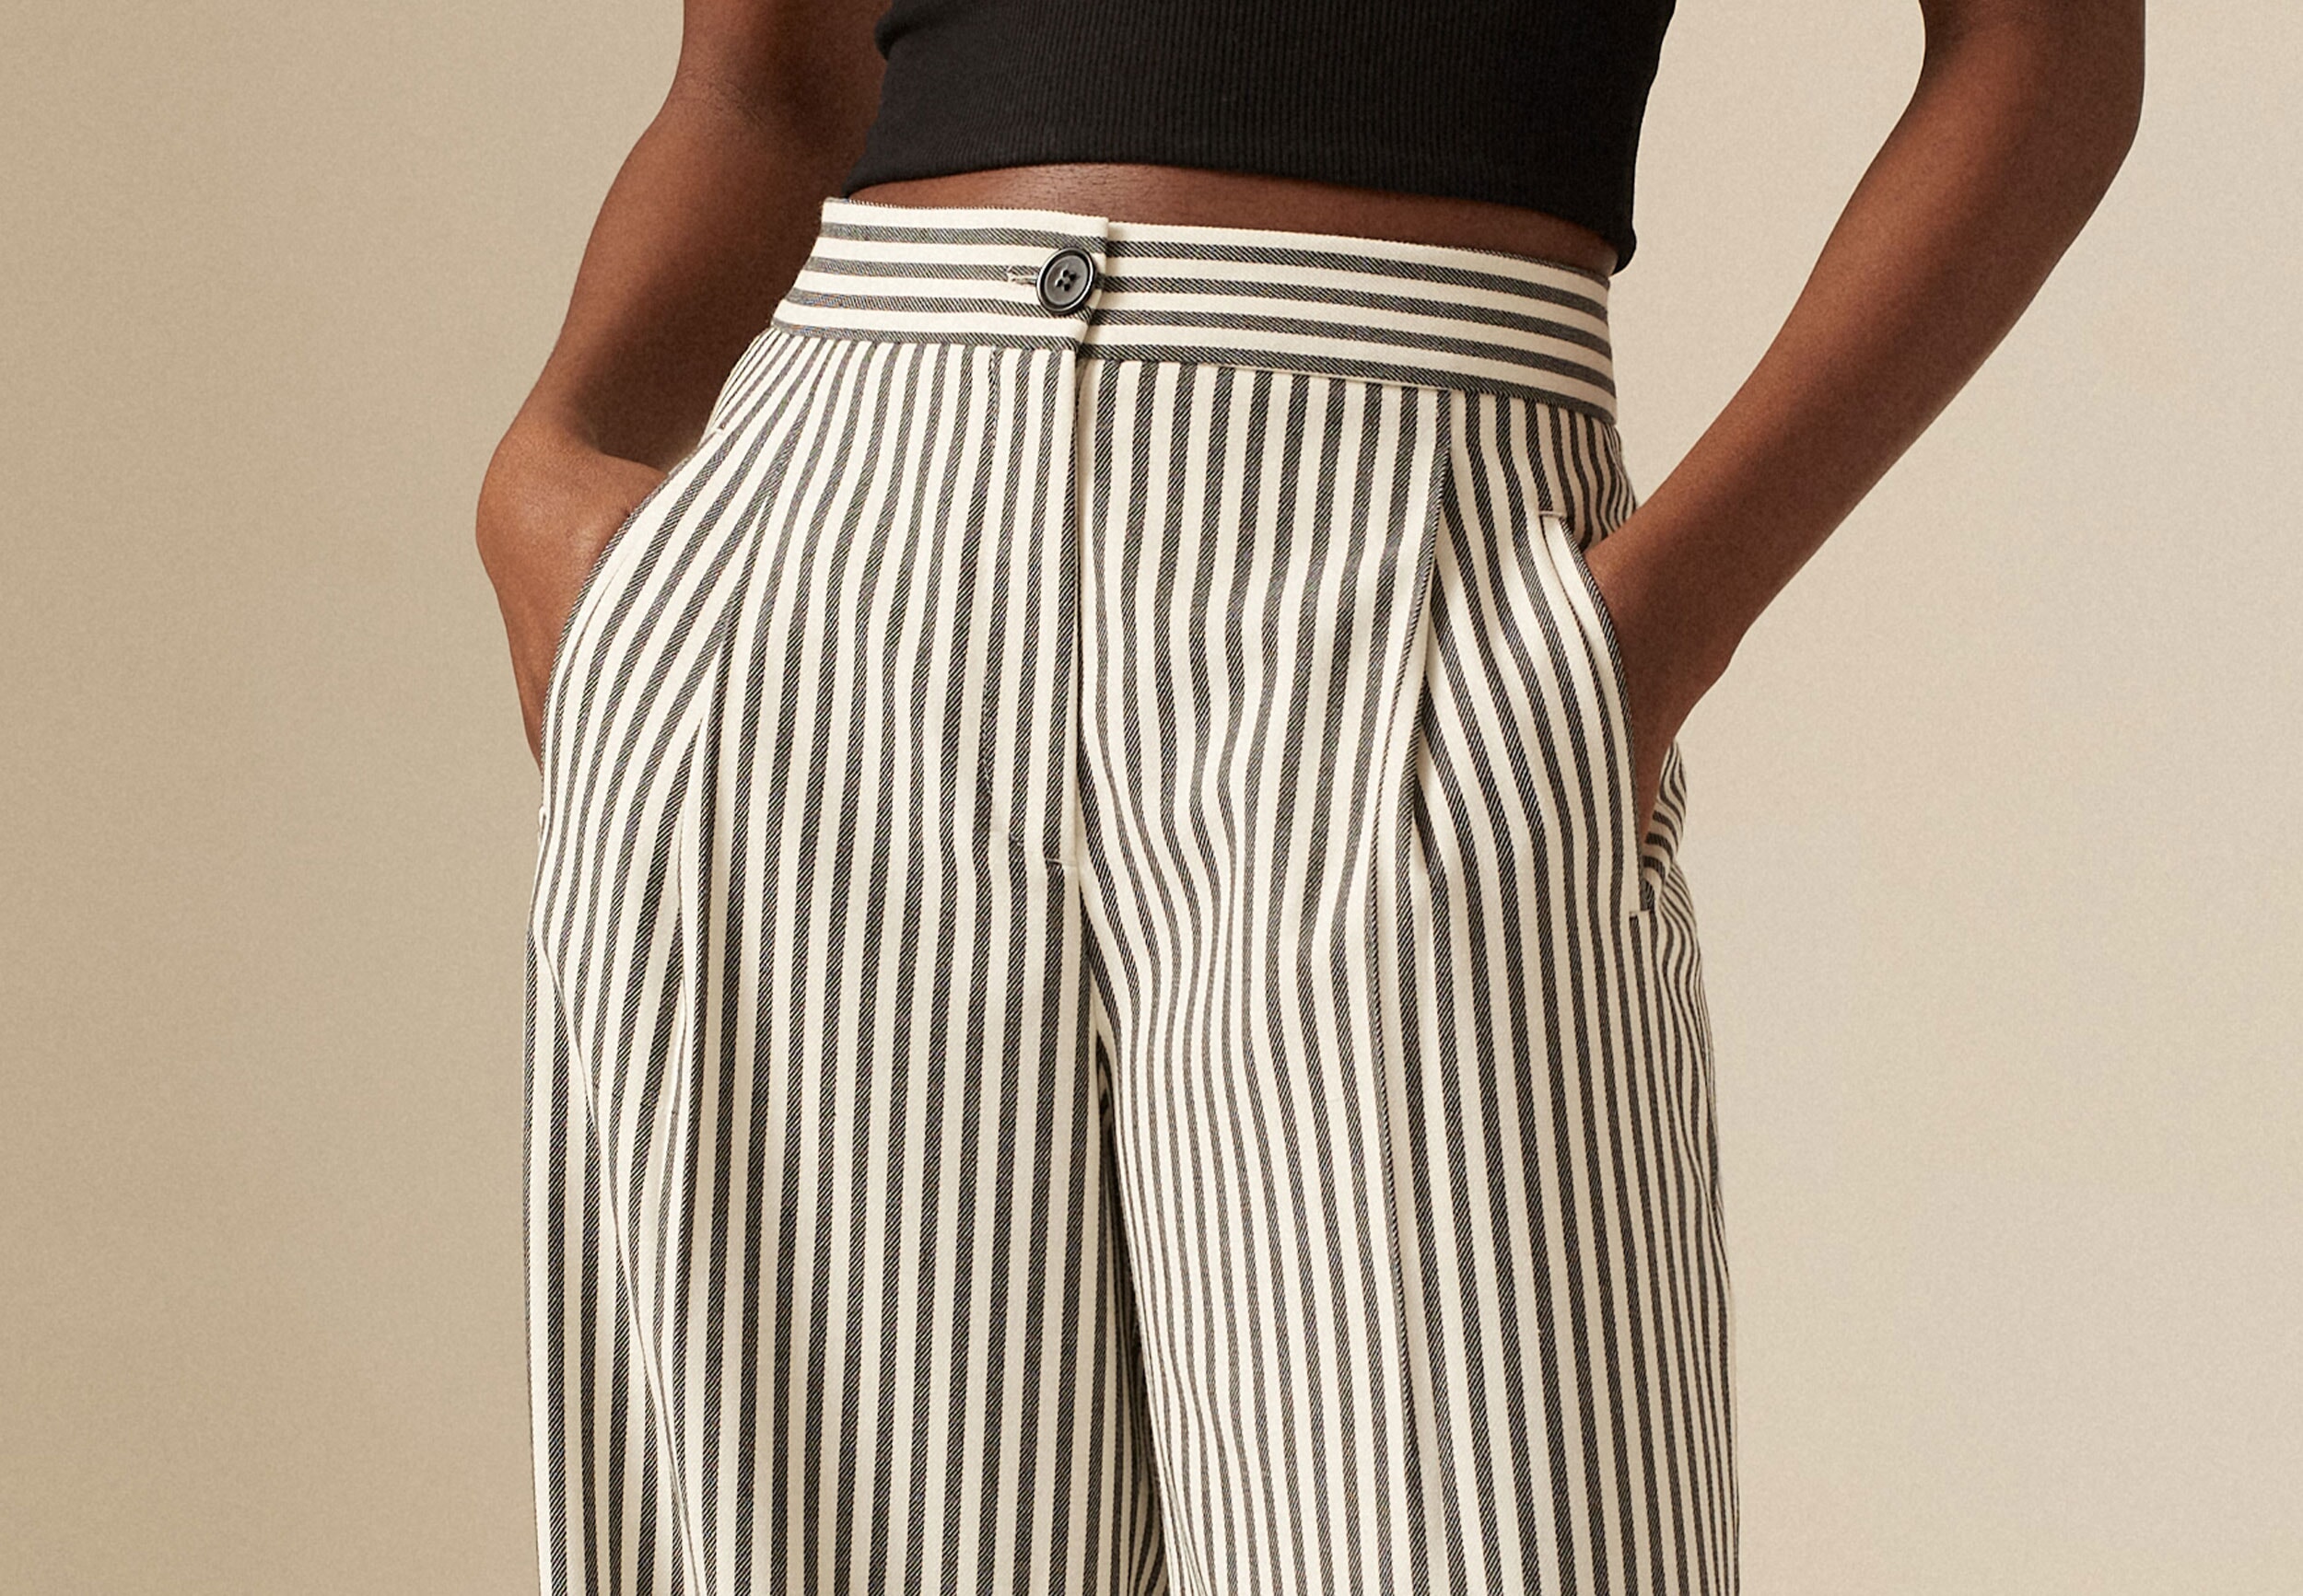 The Best Trousers For You According To Your Body Type